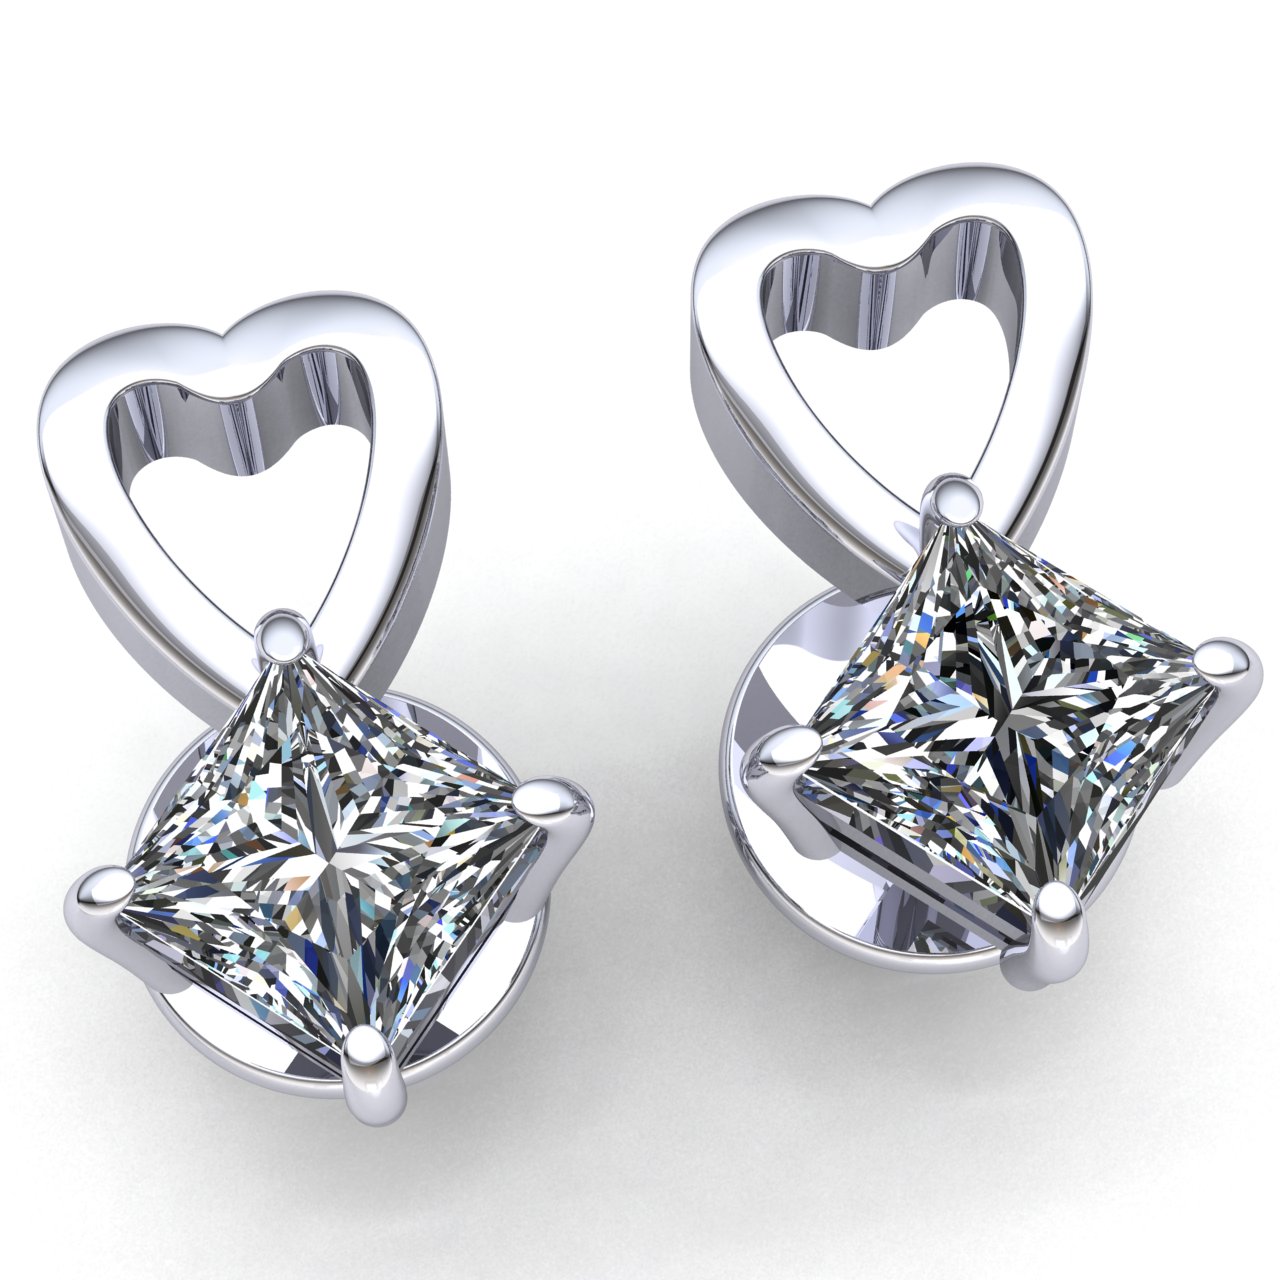 Jewel We Sell Genuine 1/4ct Princess Cut Diamond Ladies Heart Solitaire Stud Earrings Solid 18K White, Yellow, or Rose Gold F VS1